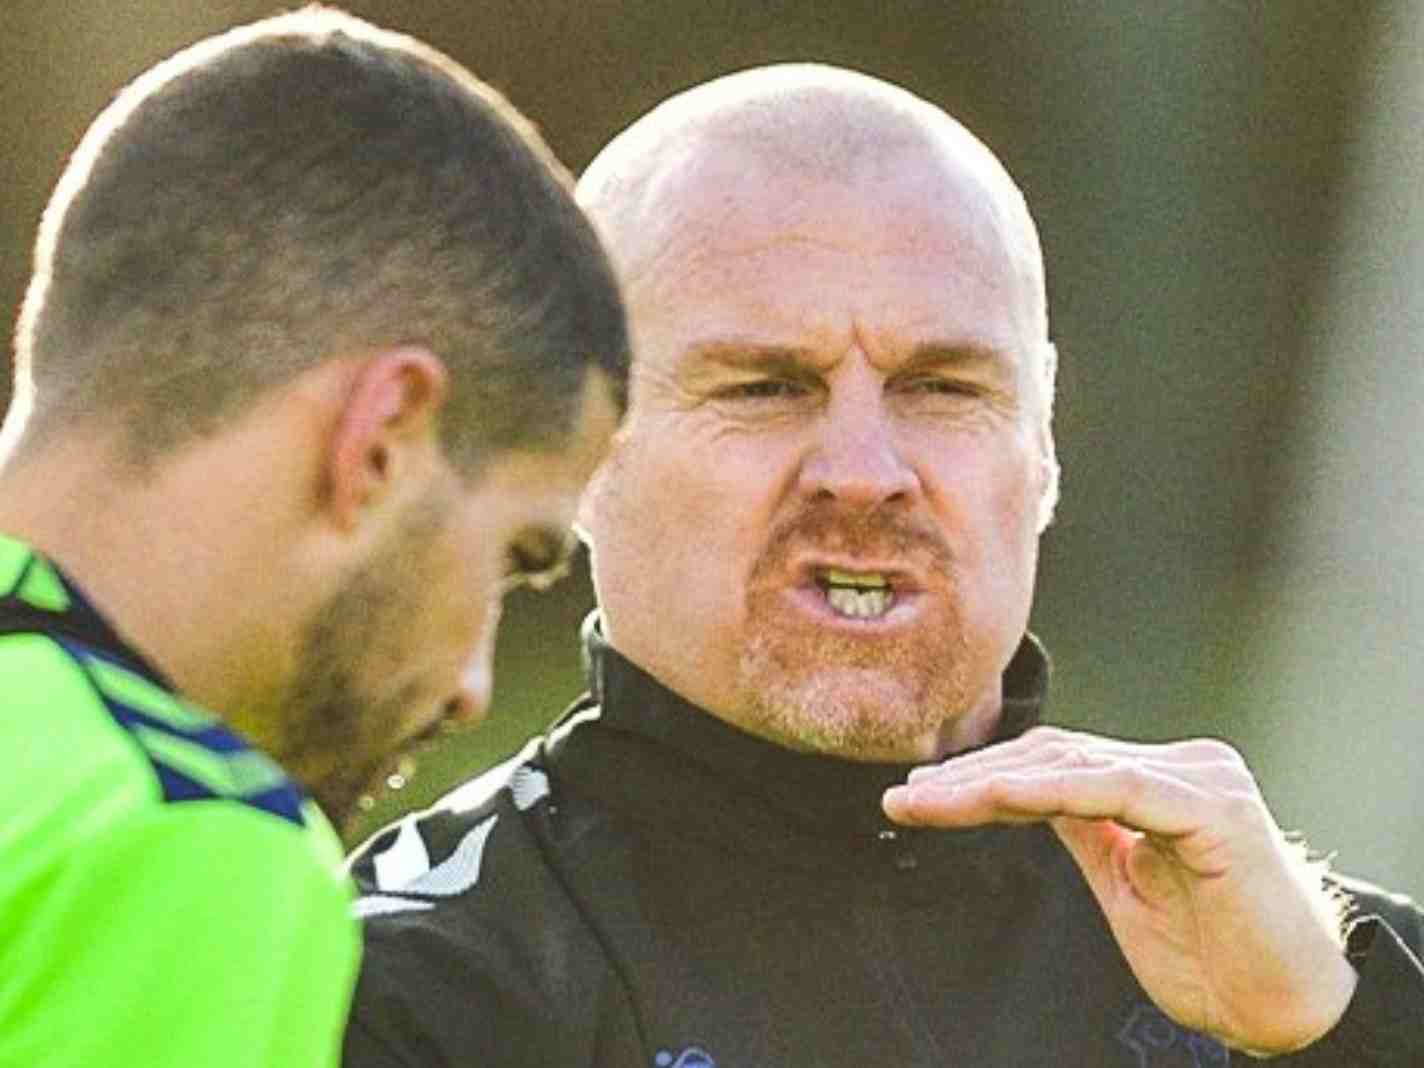 From Bleep Tests To Banning Snoods – How Sean Dyche Is Getting Everton Ready For Relegation Dogfight